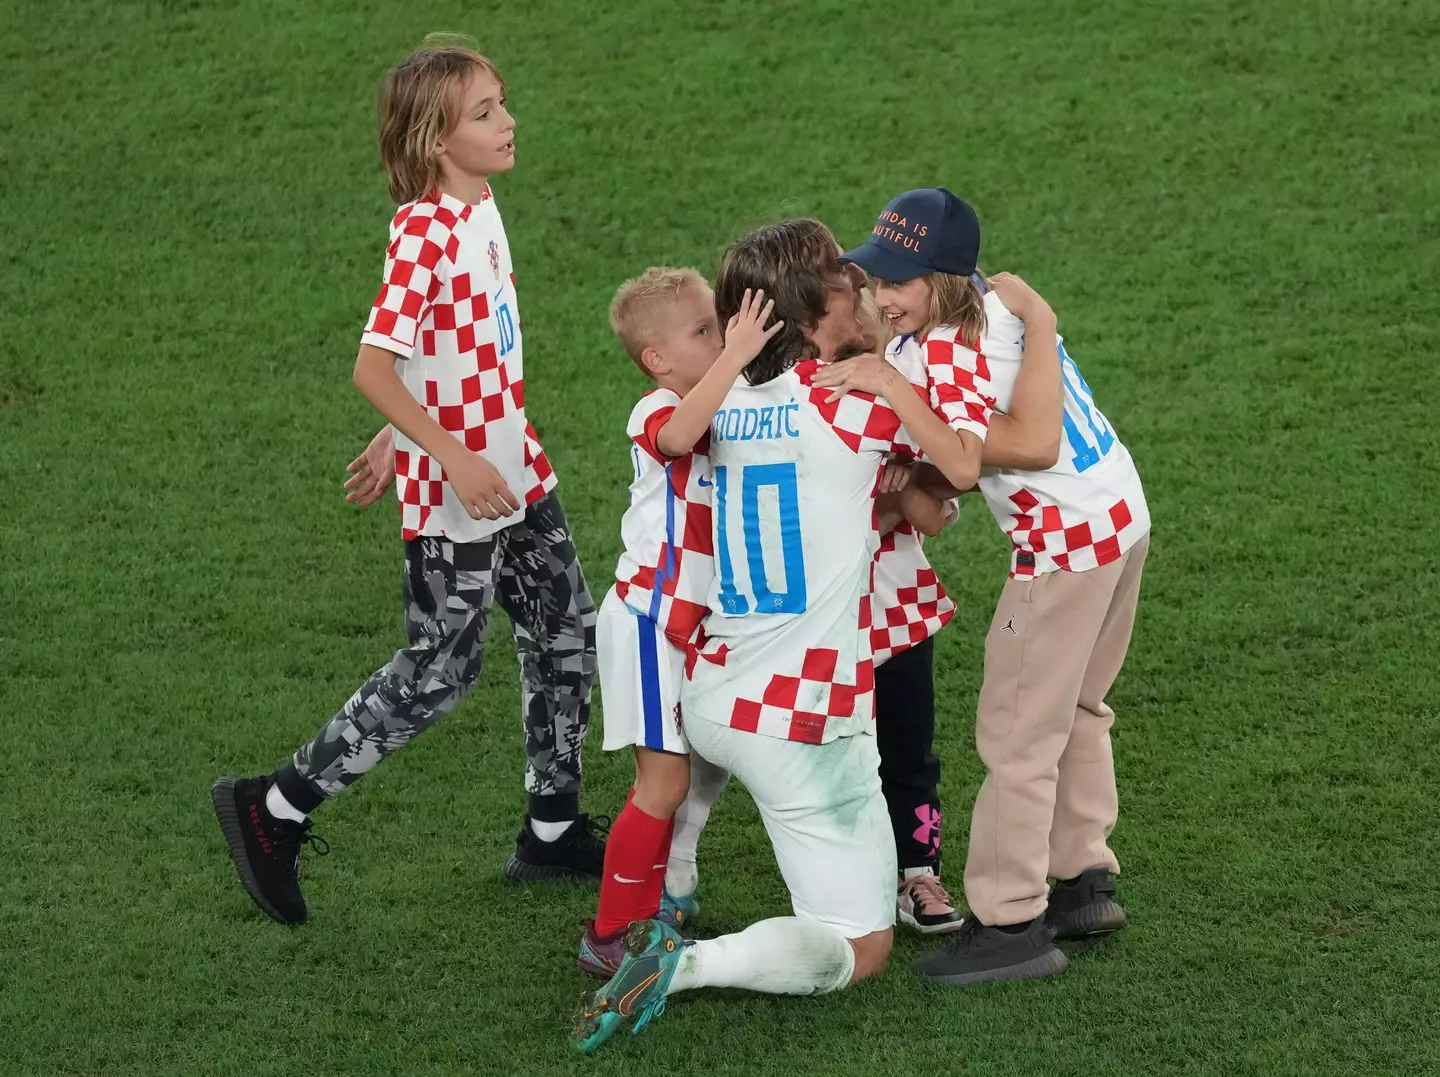 Modric celebrates winning the quarter-final against Brazil with his family. Image: Alamy